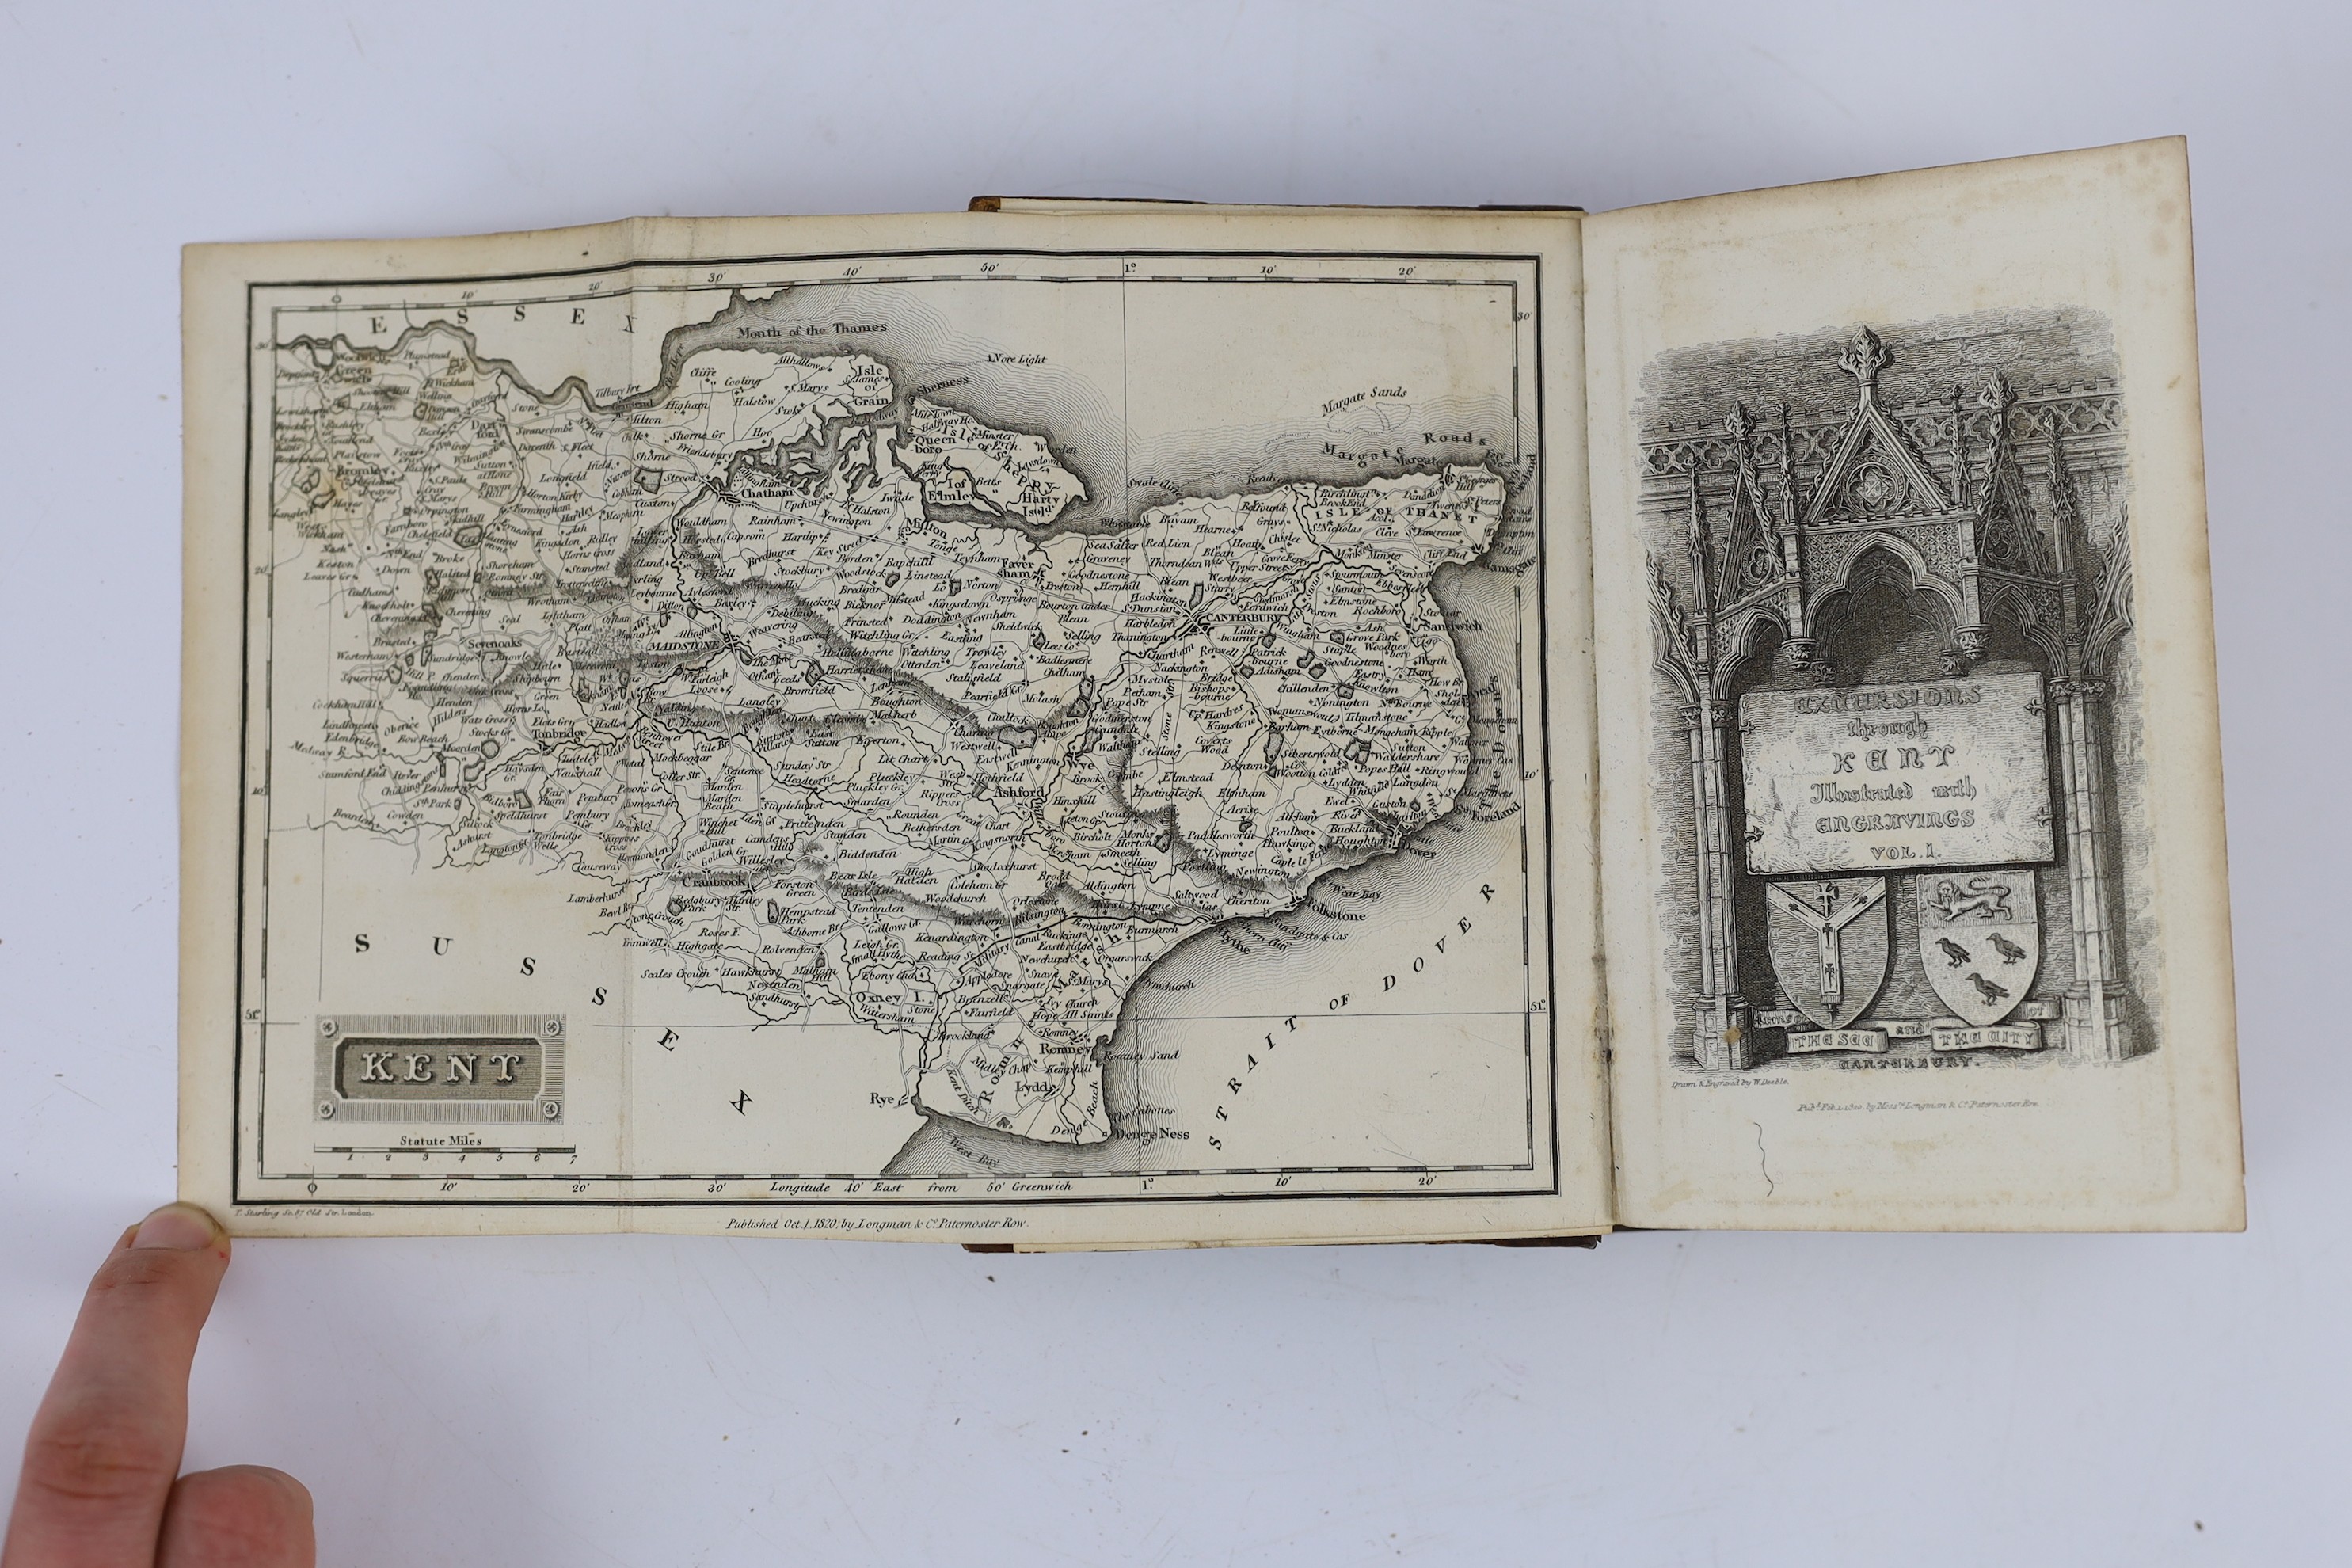 KENT: Excursions in the County of Kent....forming a complete guide for the traveller and tourist....pictorial engraved and printed titles, folded map and folded Canterbury plan, 45 plates; old half calf and marbled board